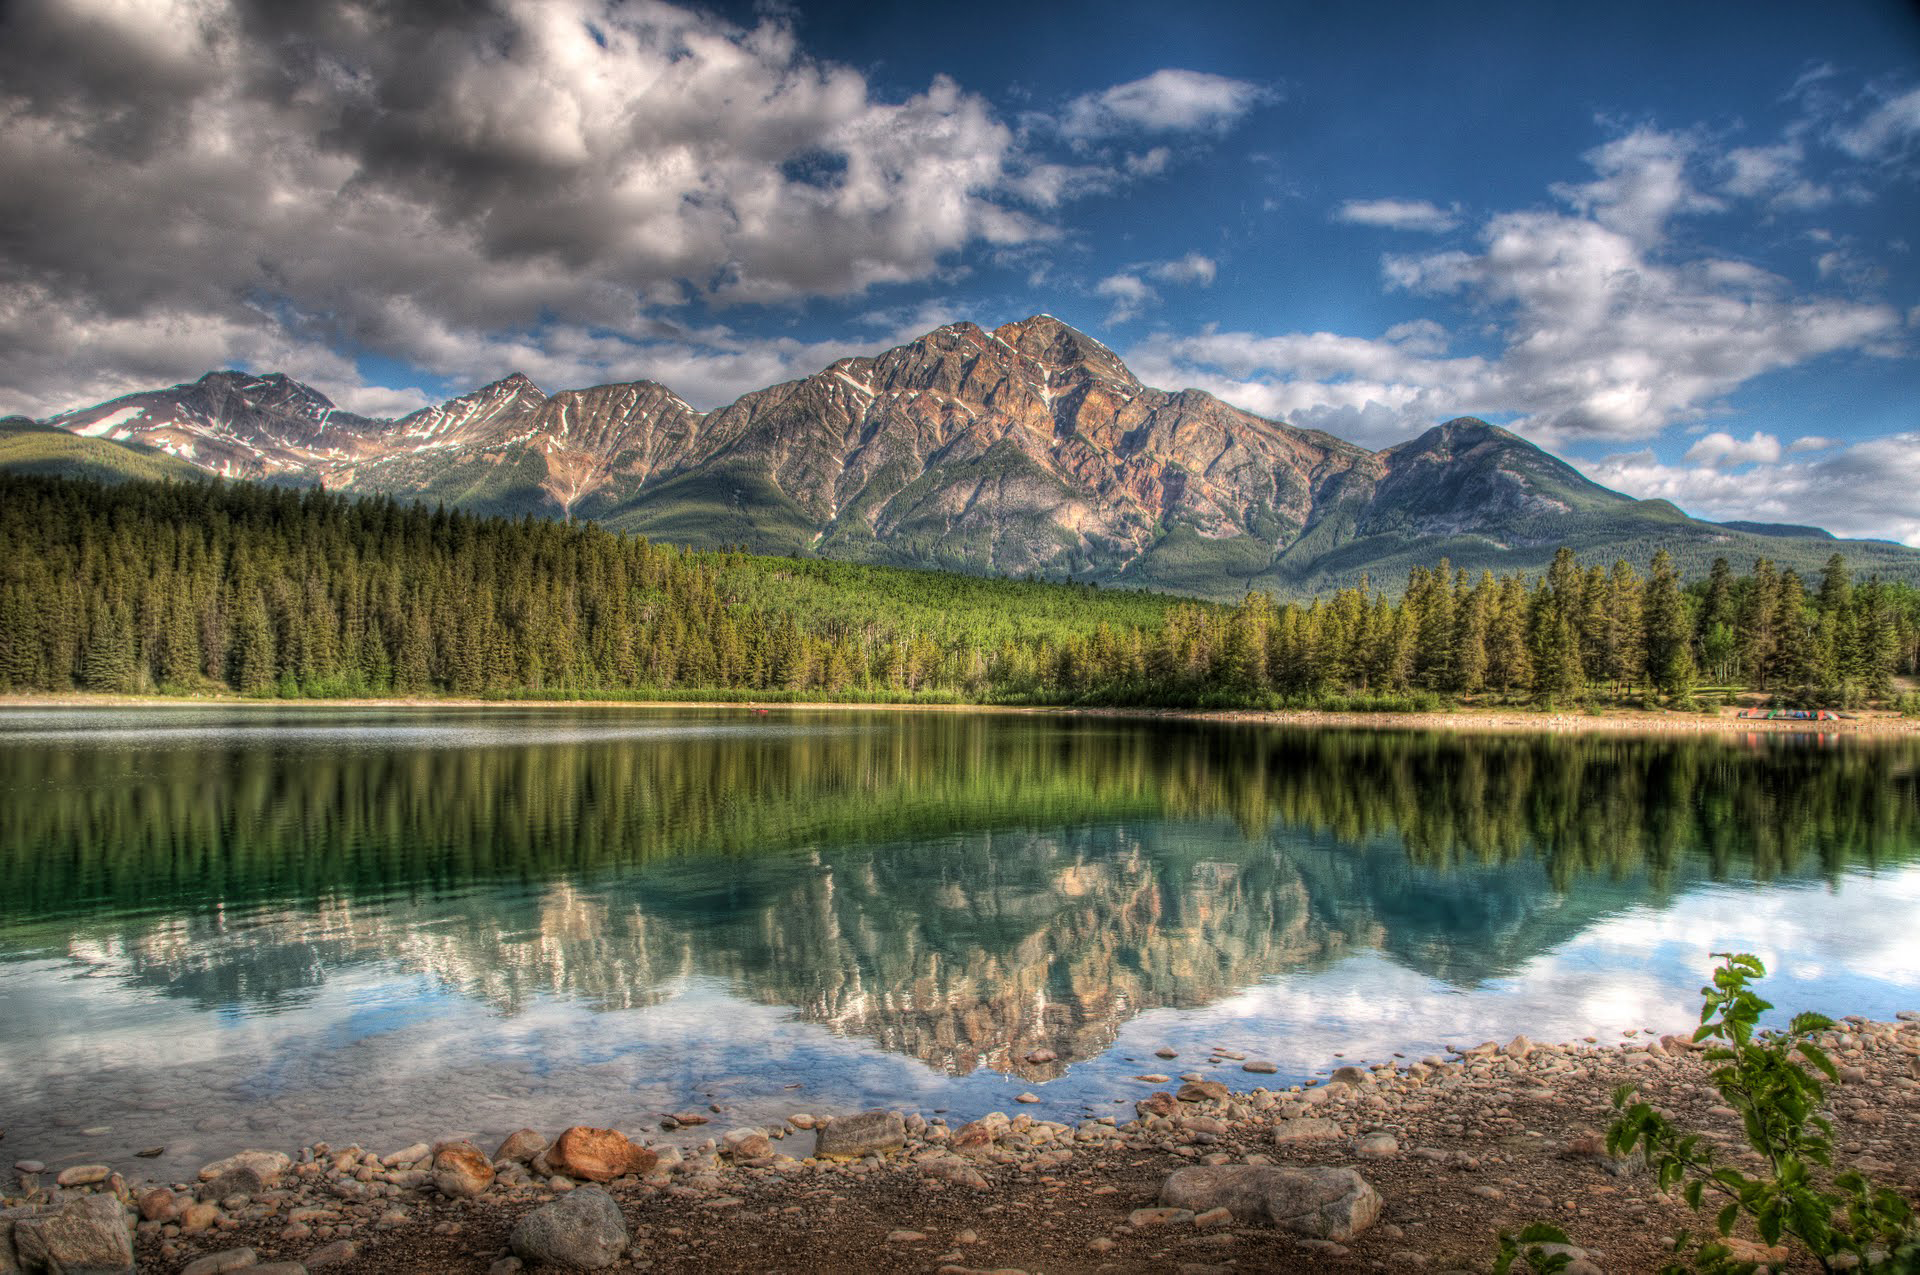 rockies wallpaper,natural landscape,reflection,nature,mountain,body of water